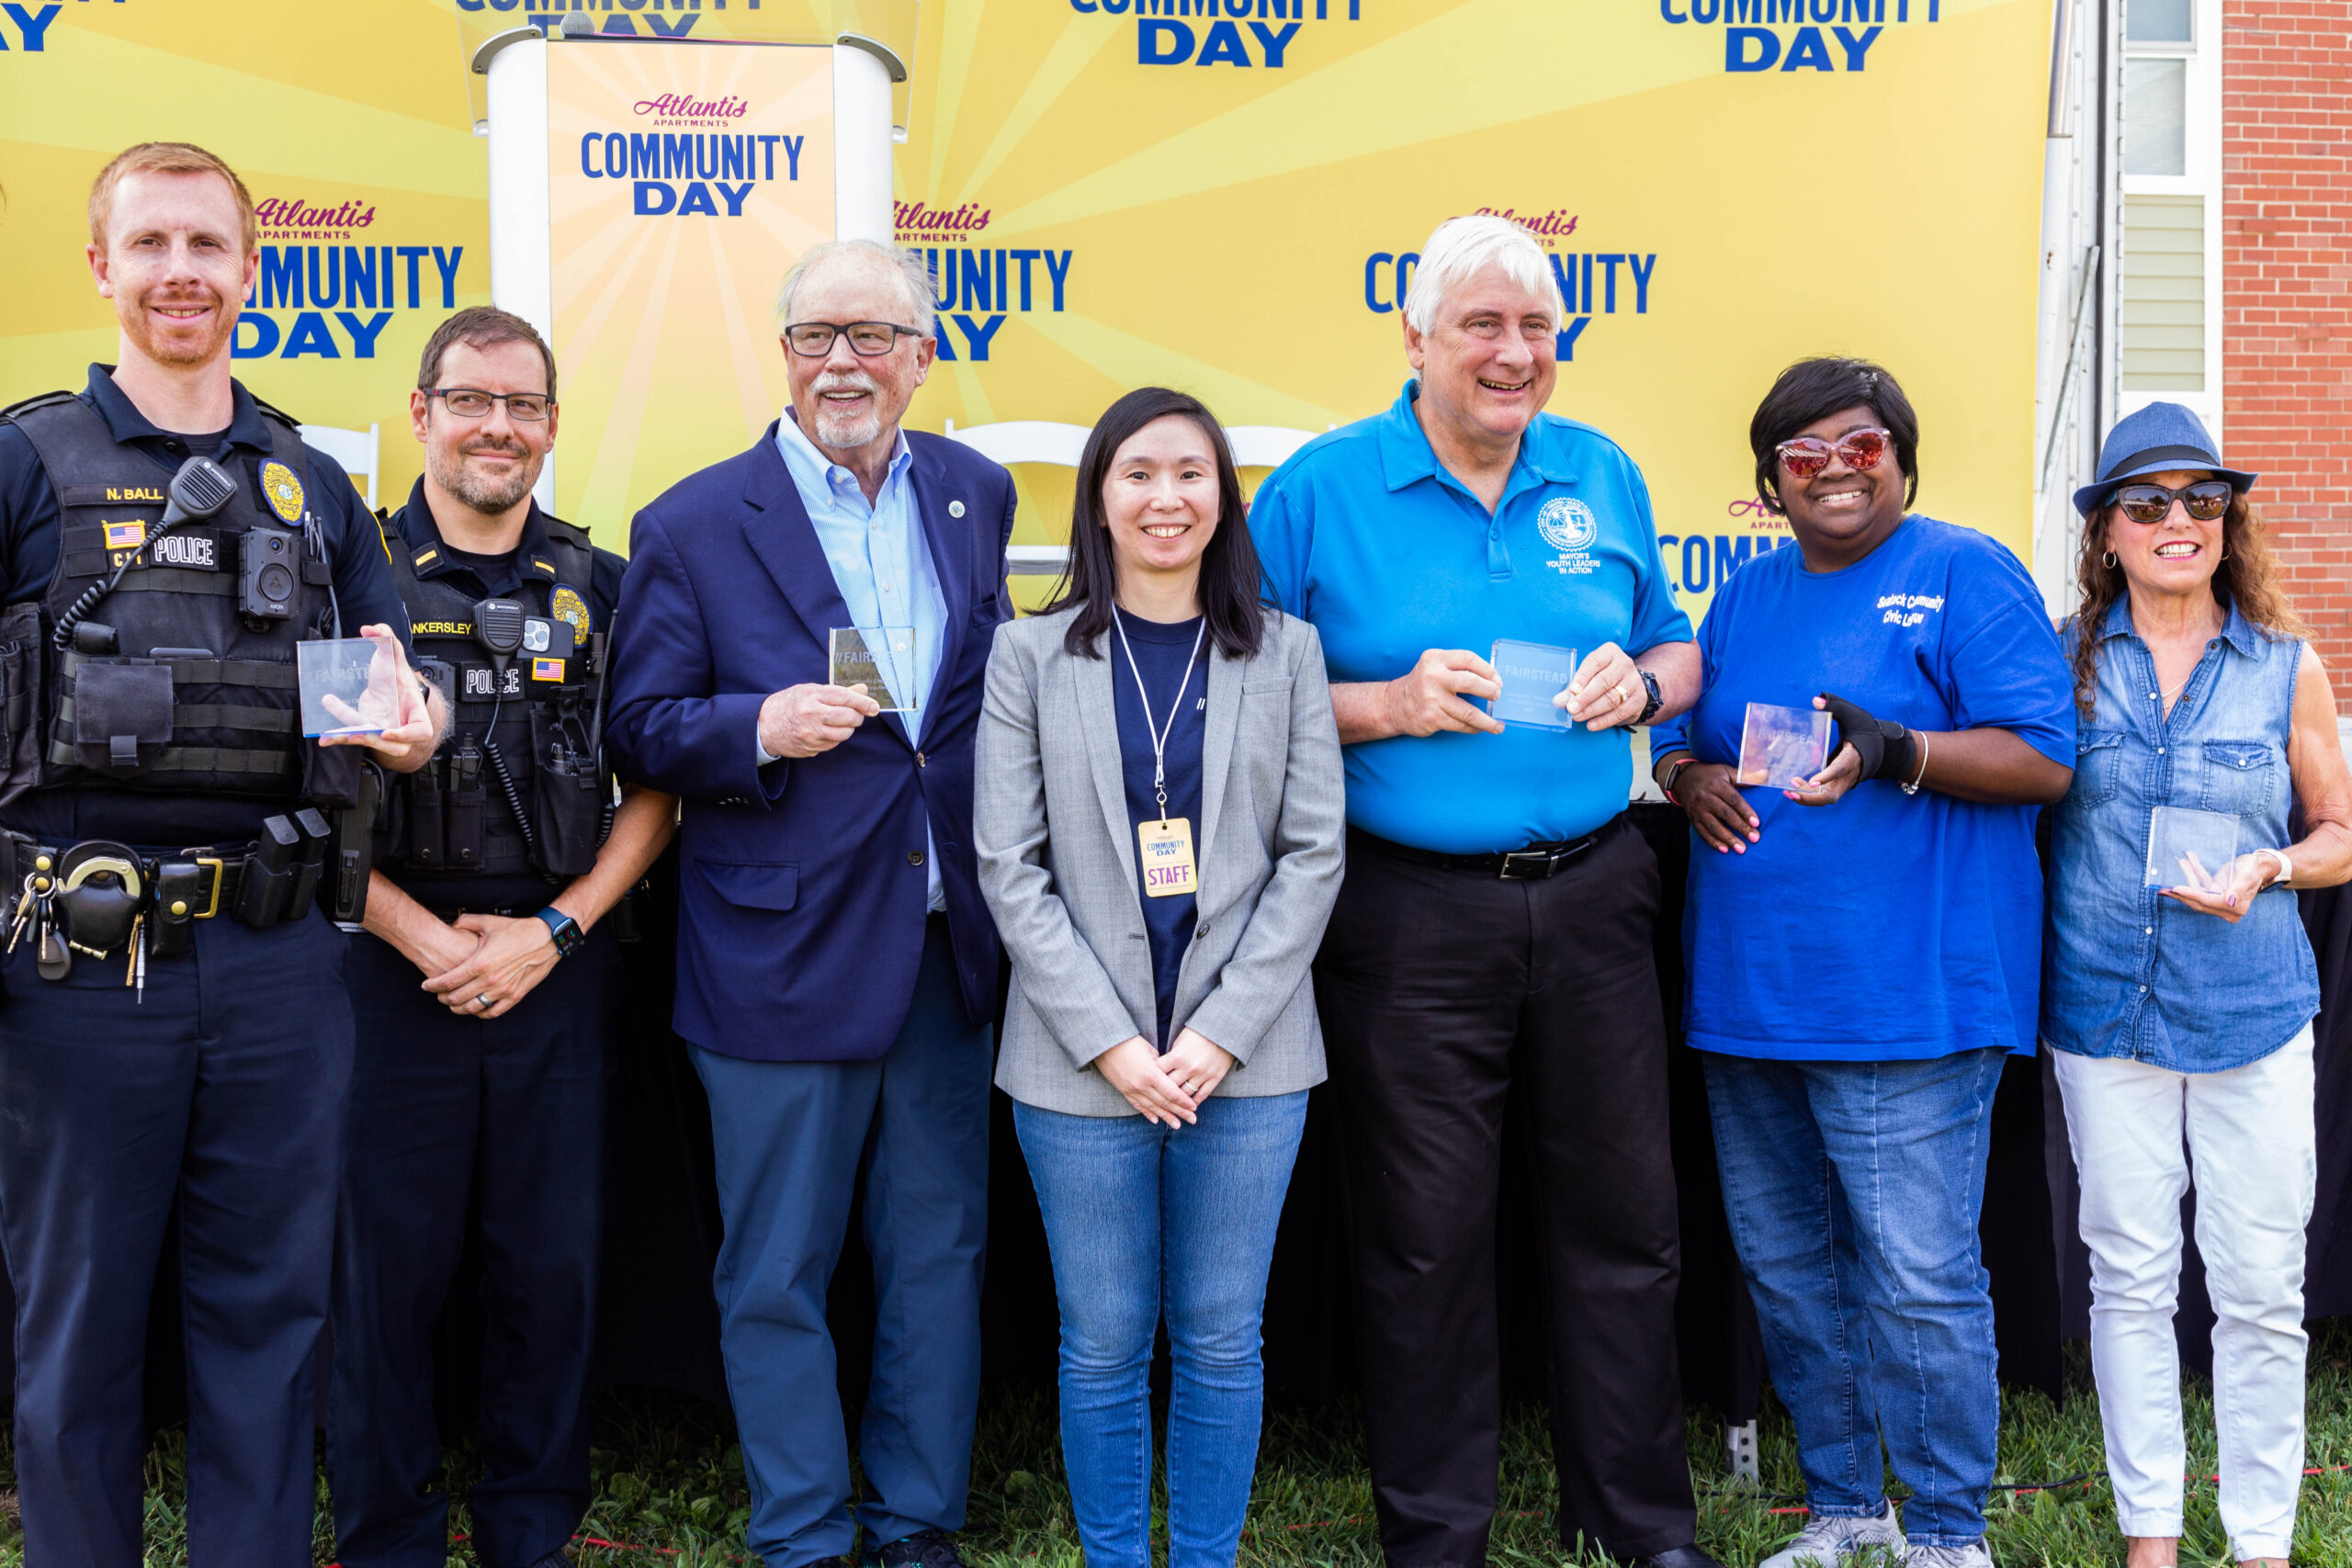 police officers, elected officials, fairstead staff, and community members smiling in front of an Atlantis community day banner